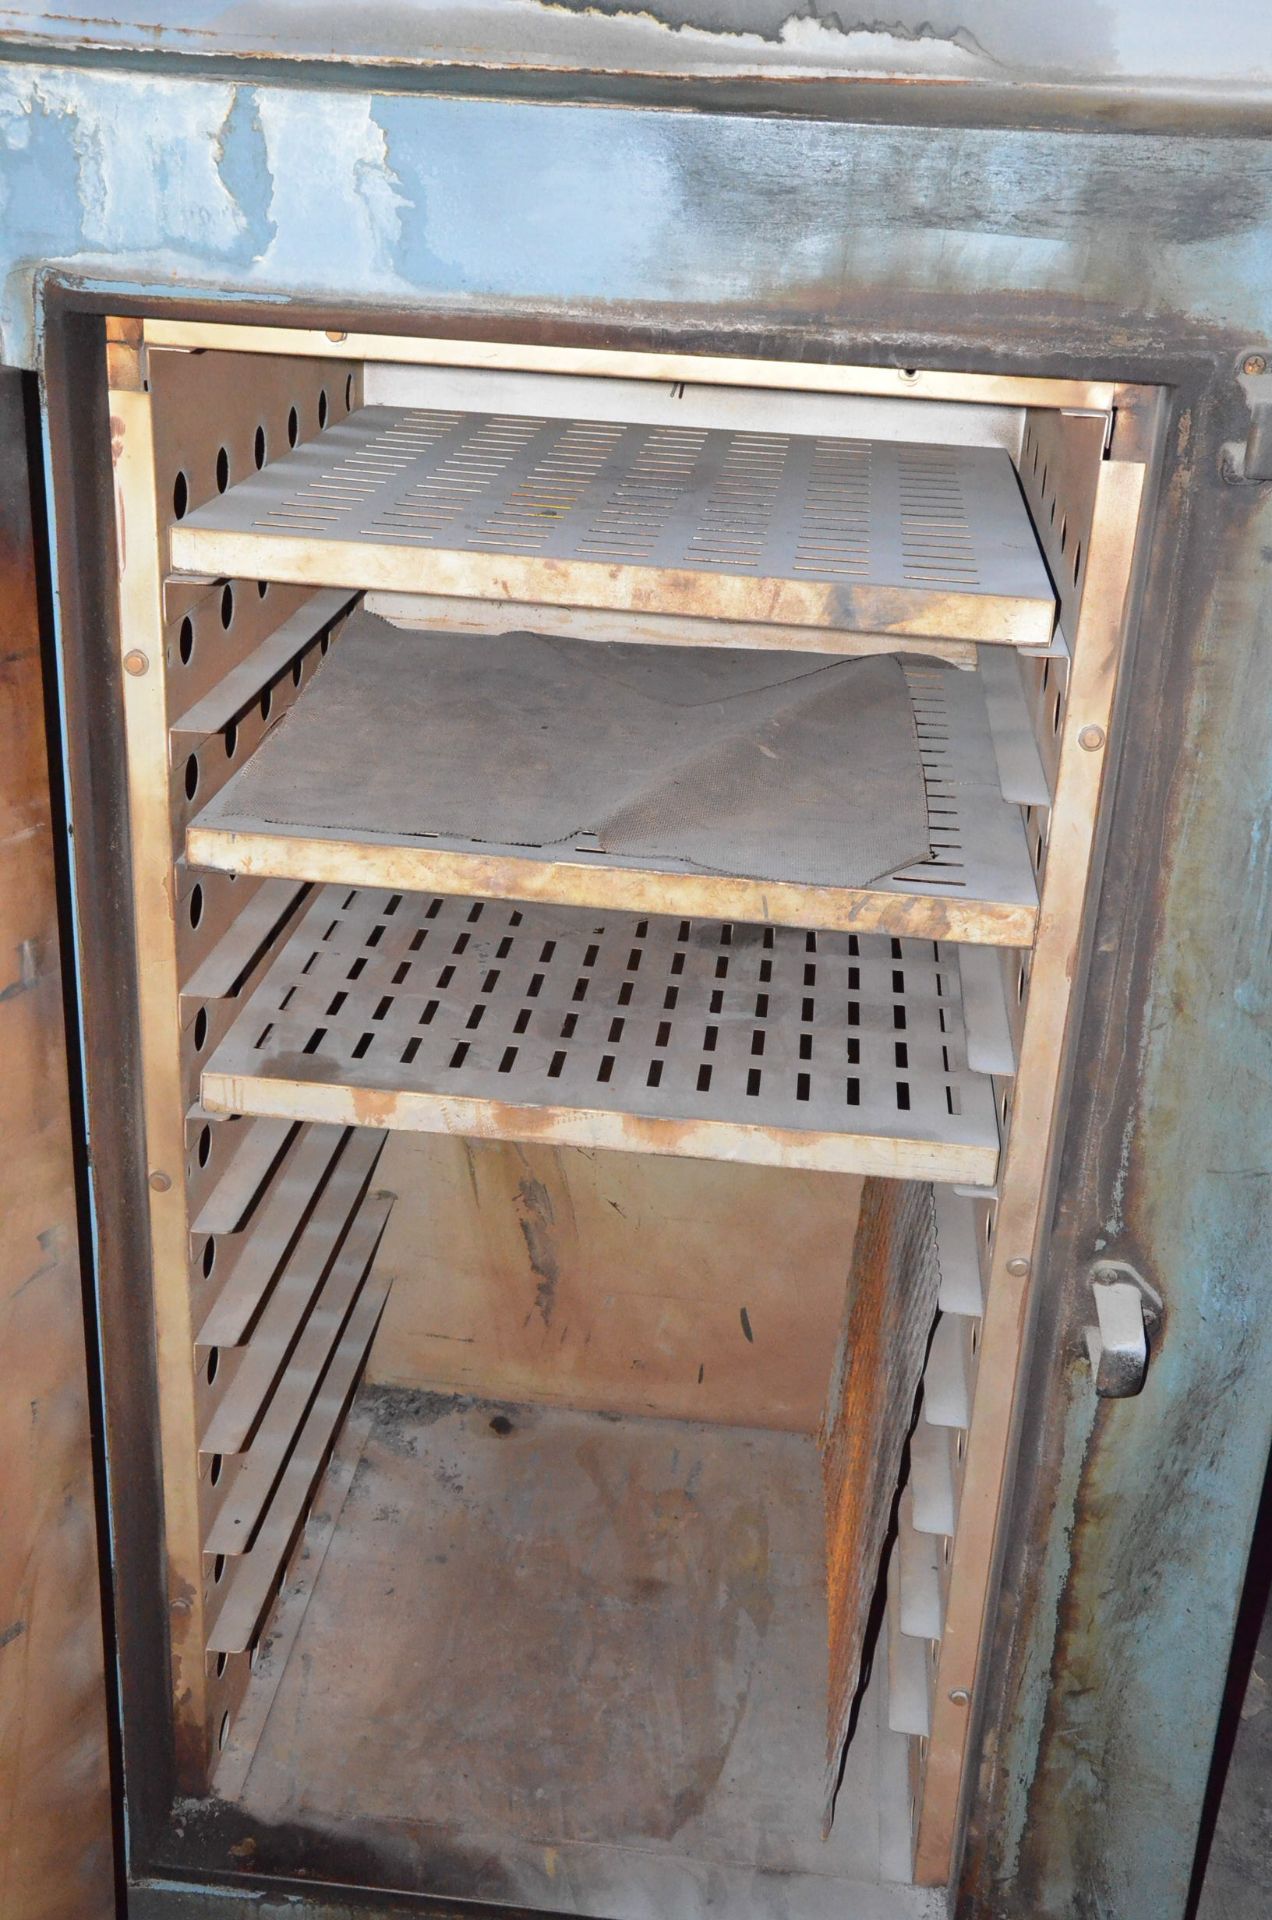 GENERAL SIGNAL BLUE M STEAM FIRED LABORATORY BATCH CURING OVEN WITH 24" x 24" x 50" ENCLOSURE, - Image 2 of 3